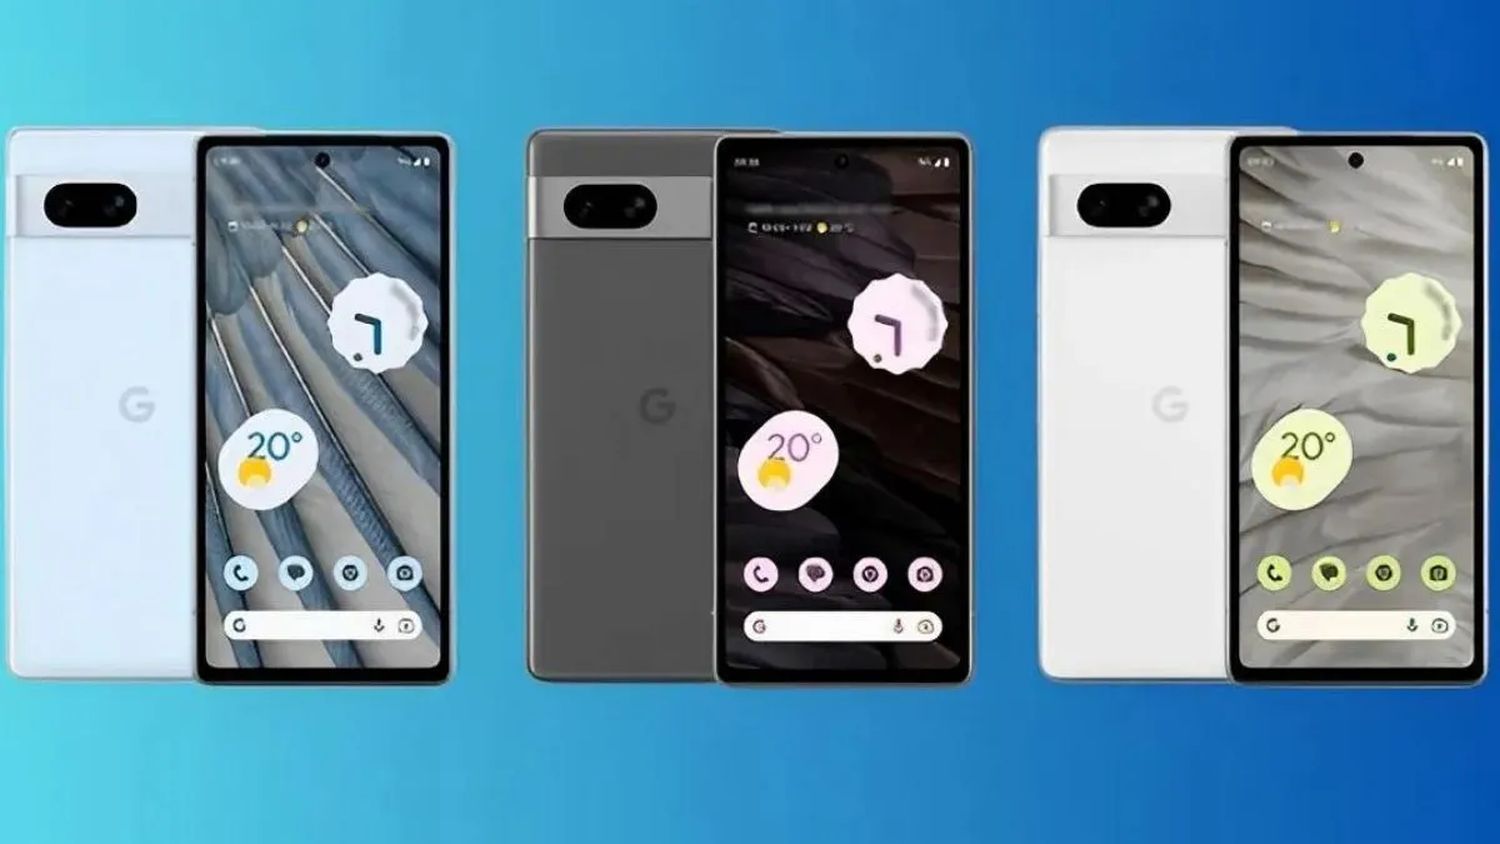 Google Pixel 7a will cost from €509 / £499 in Europe - a price increase of €50-115 over Pixel 6a